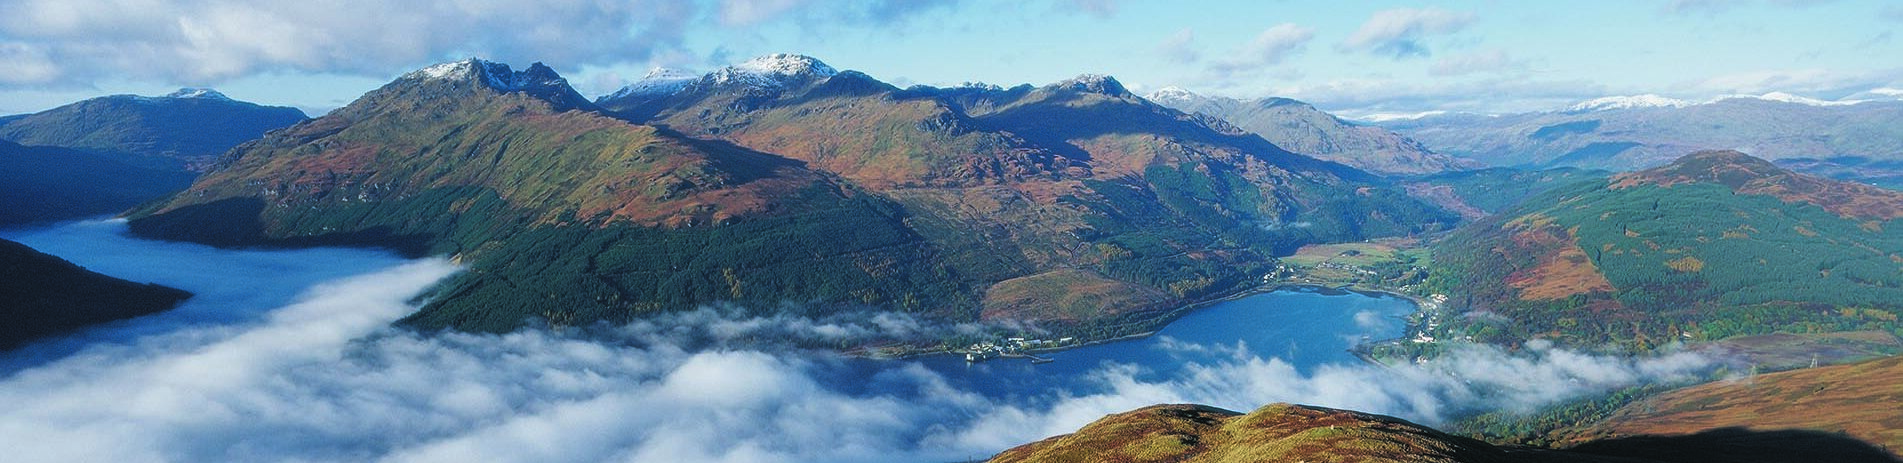 panoramic-view-of-arrochar-alps-mountains-shrouded-in-mist-with-arrochar-village-at-head-of-loch-long-on-the-right